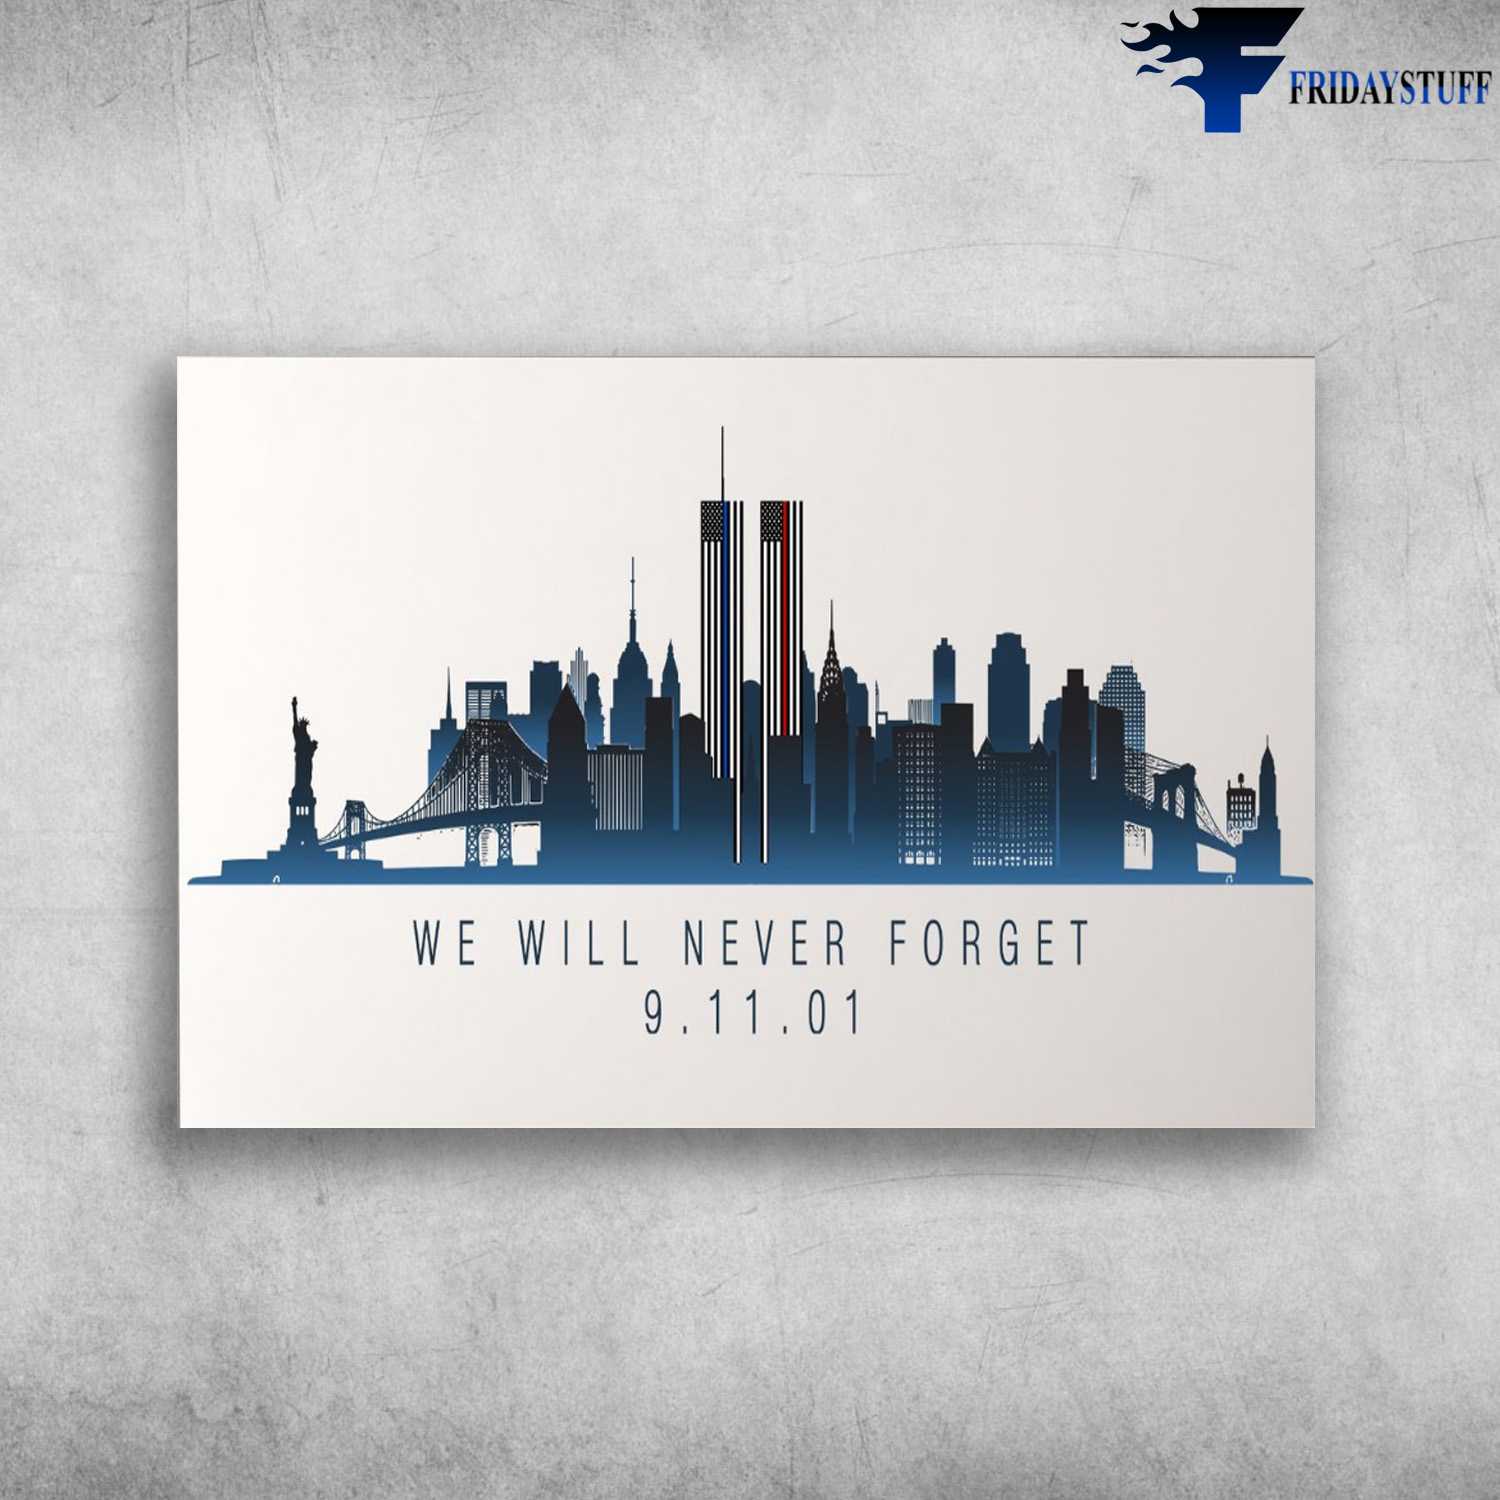 The September 11 attacks - We Will Never Forget, 9.11.01, New York City